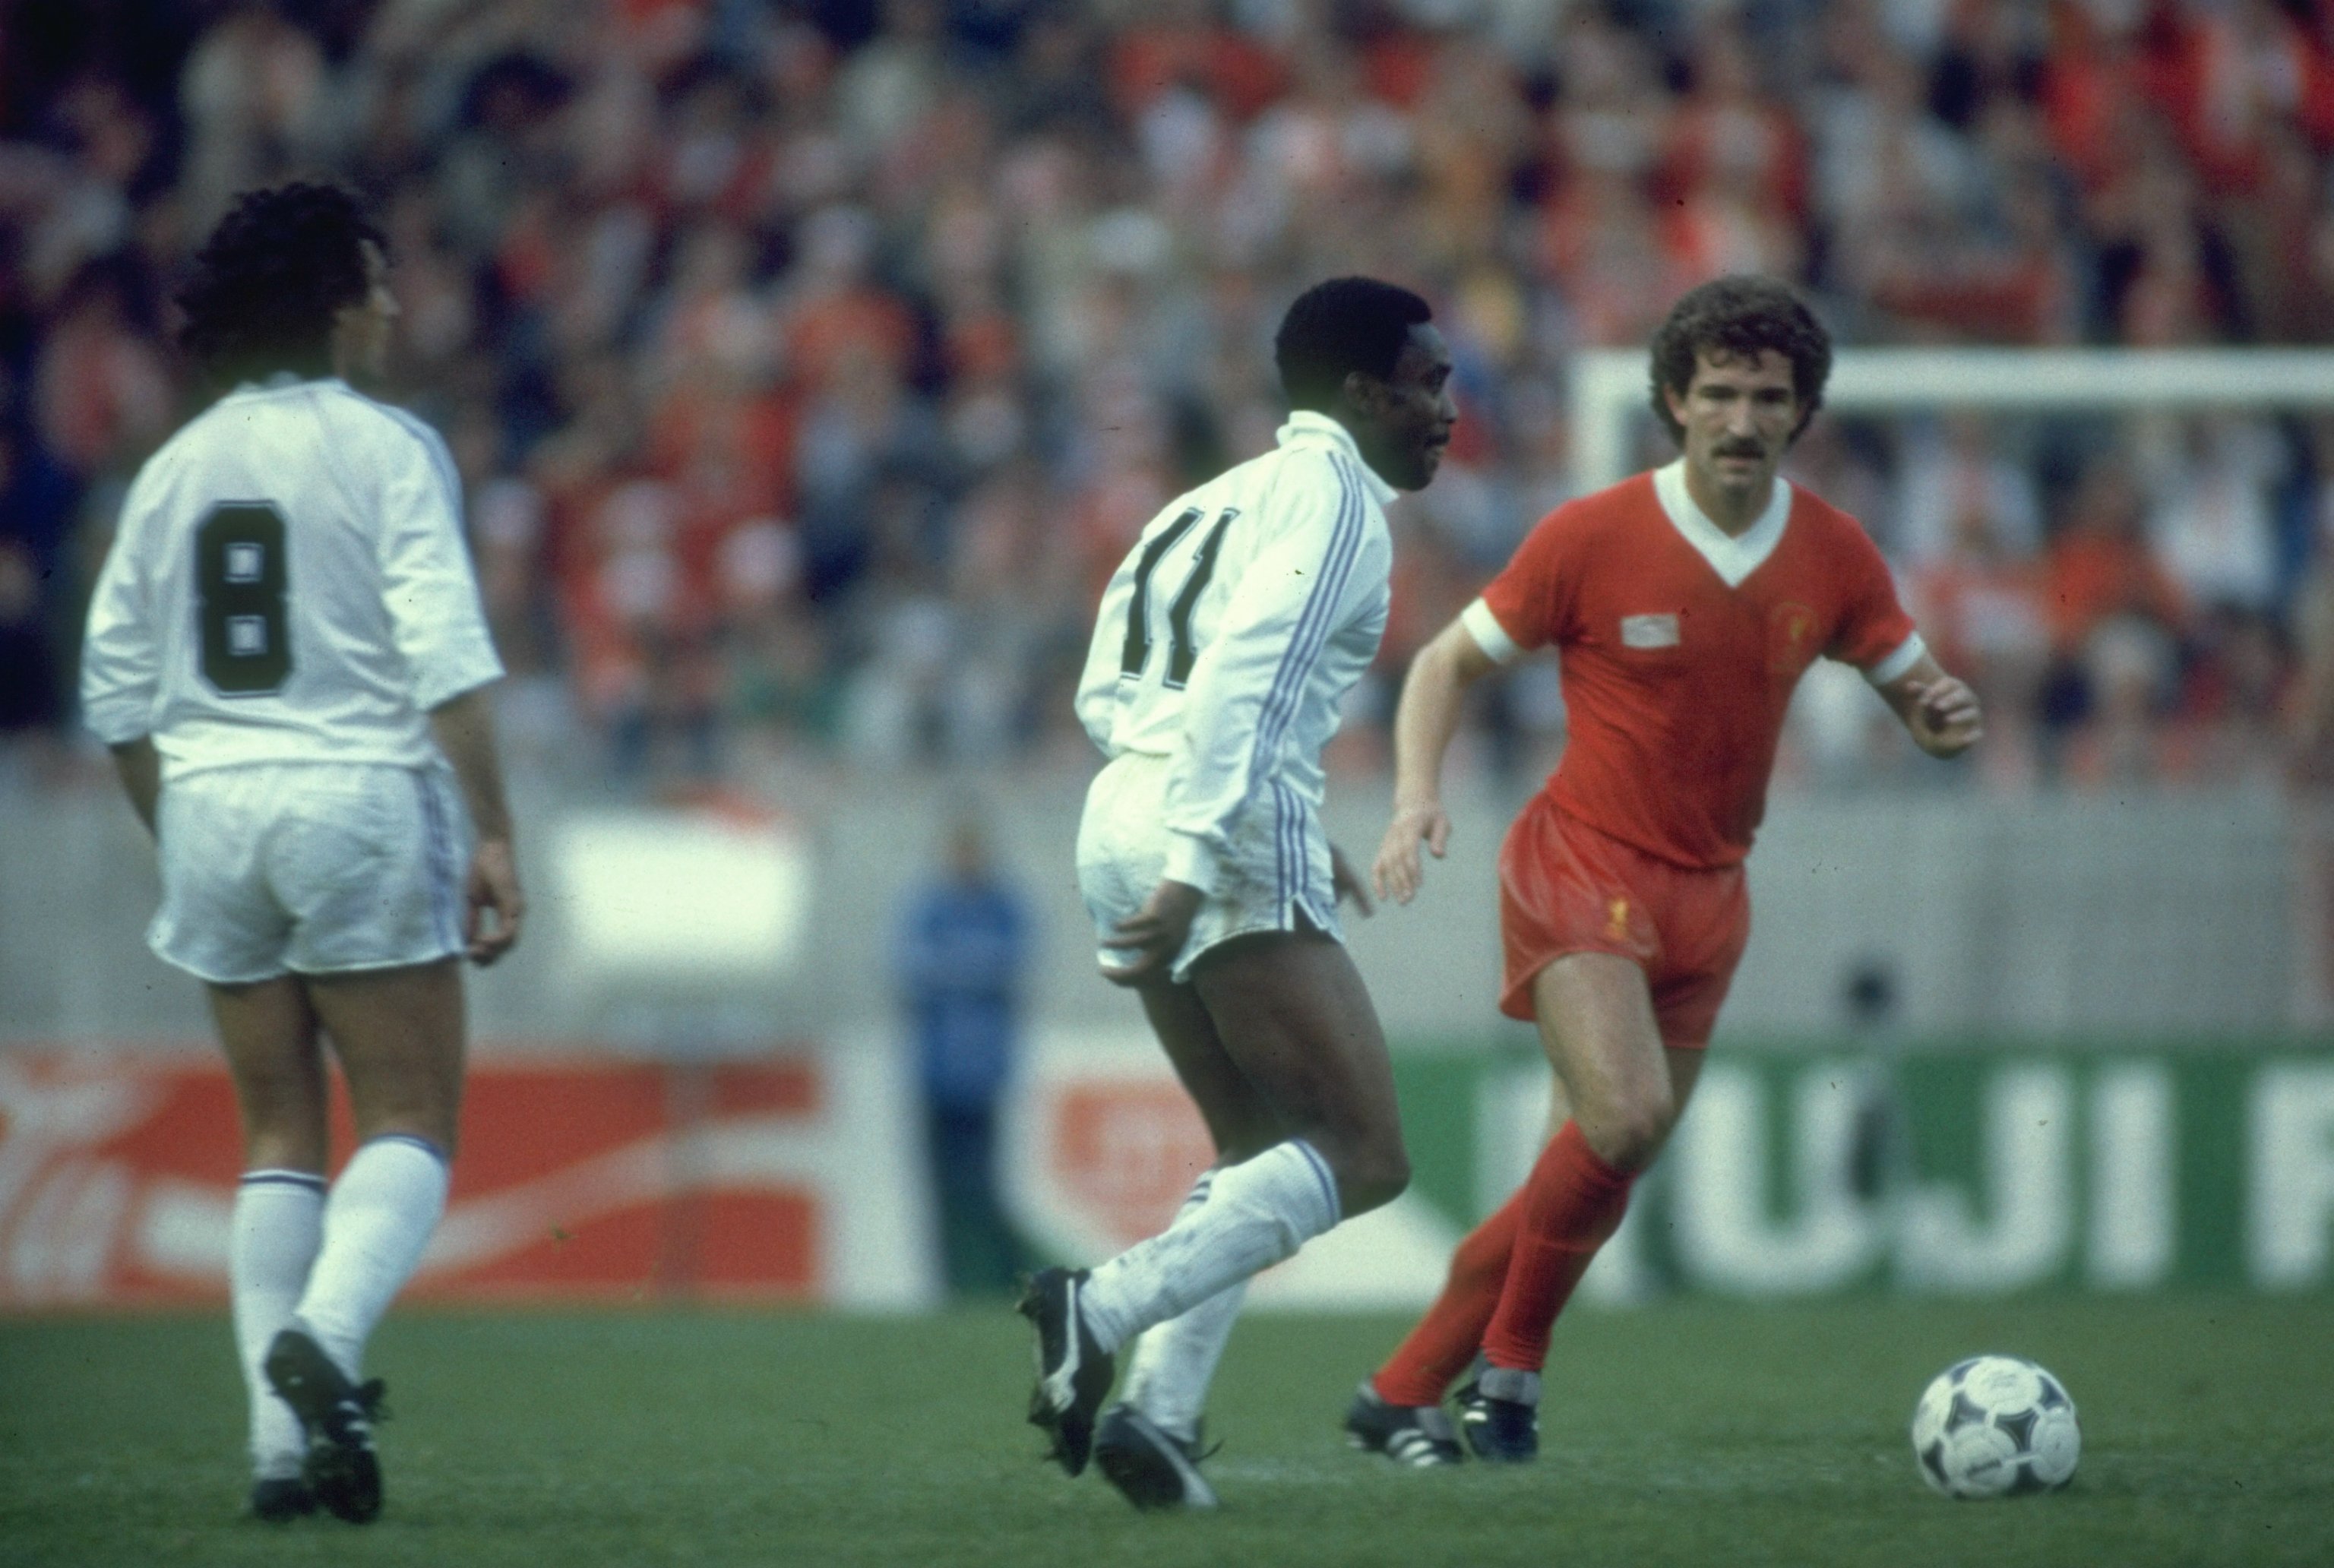 1981:  Graham Souness (right) of Liverpool takes on Laurie Cunningham (left) of Real Madrid during the European Cup final at Parc des Princes in Paris. Liverpool won the match 1-0. \ Mandatory Credit: Allsport UK /Allsport